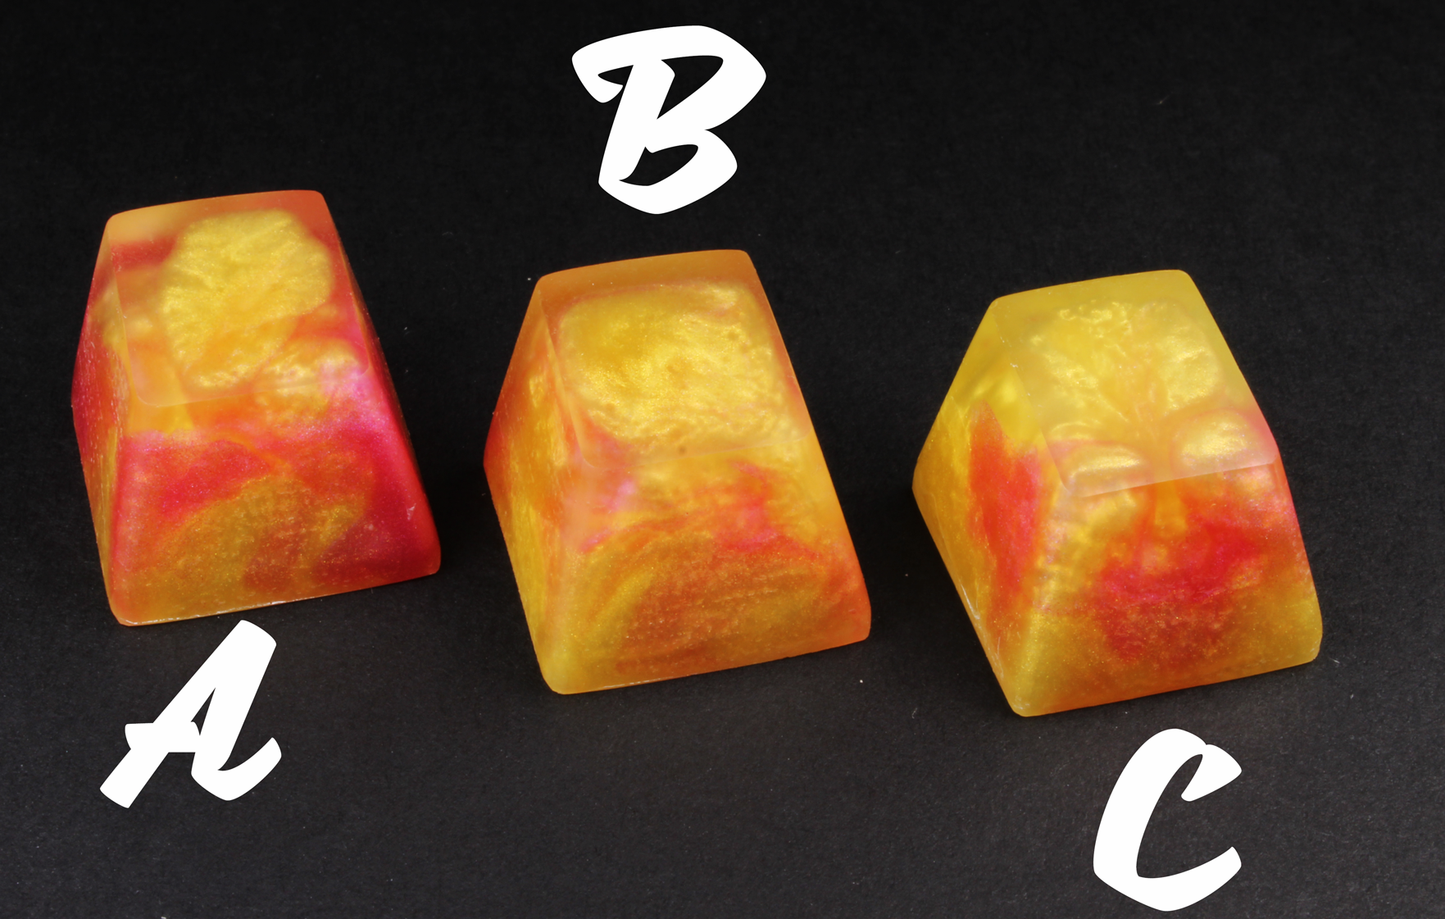 Chaos Caps 1.1 - Pink Dawn - PrimeCaps Keycap - Blank and Sculpted Artisan Keycaps for cherry MX mechanical keyboards 